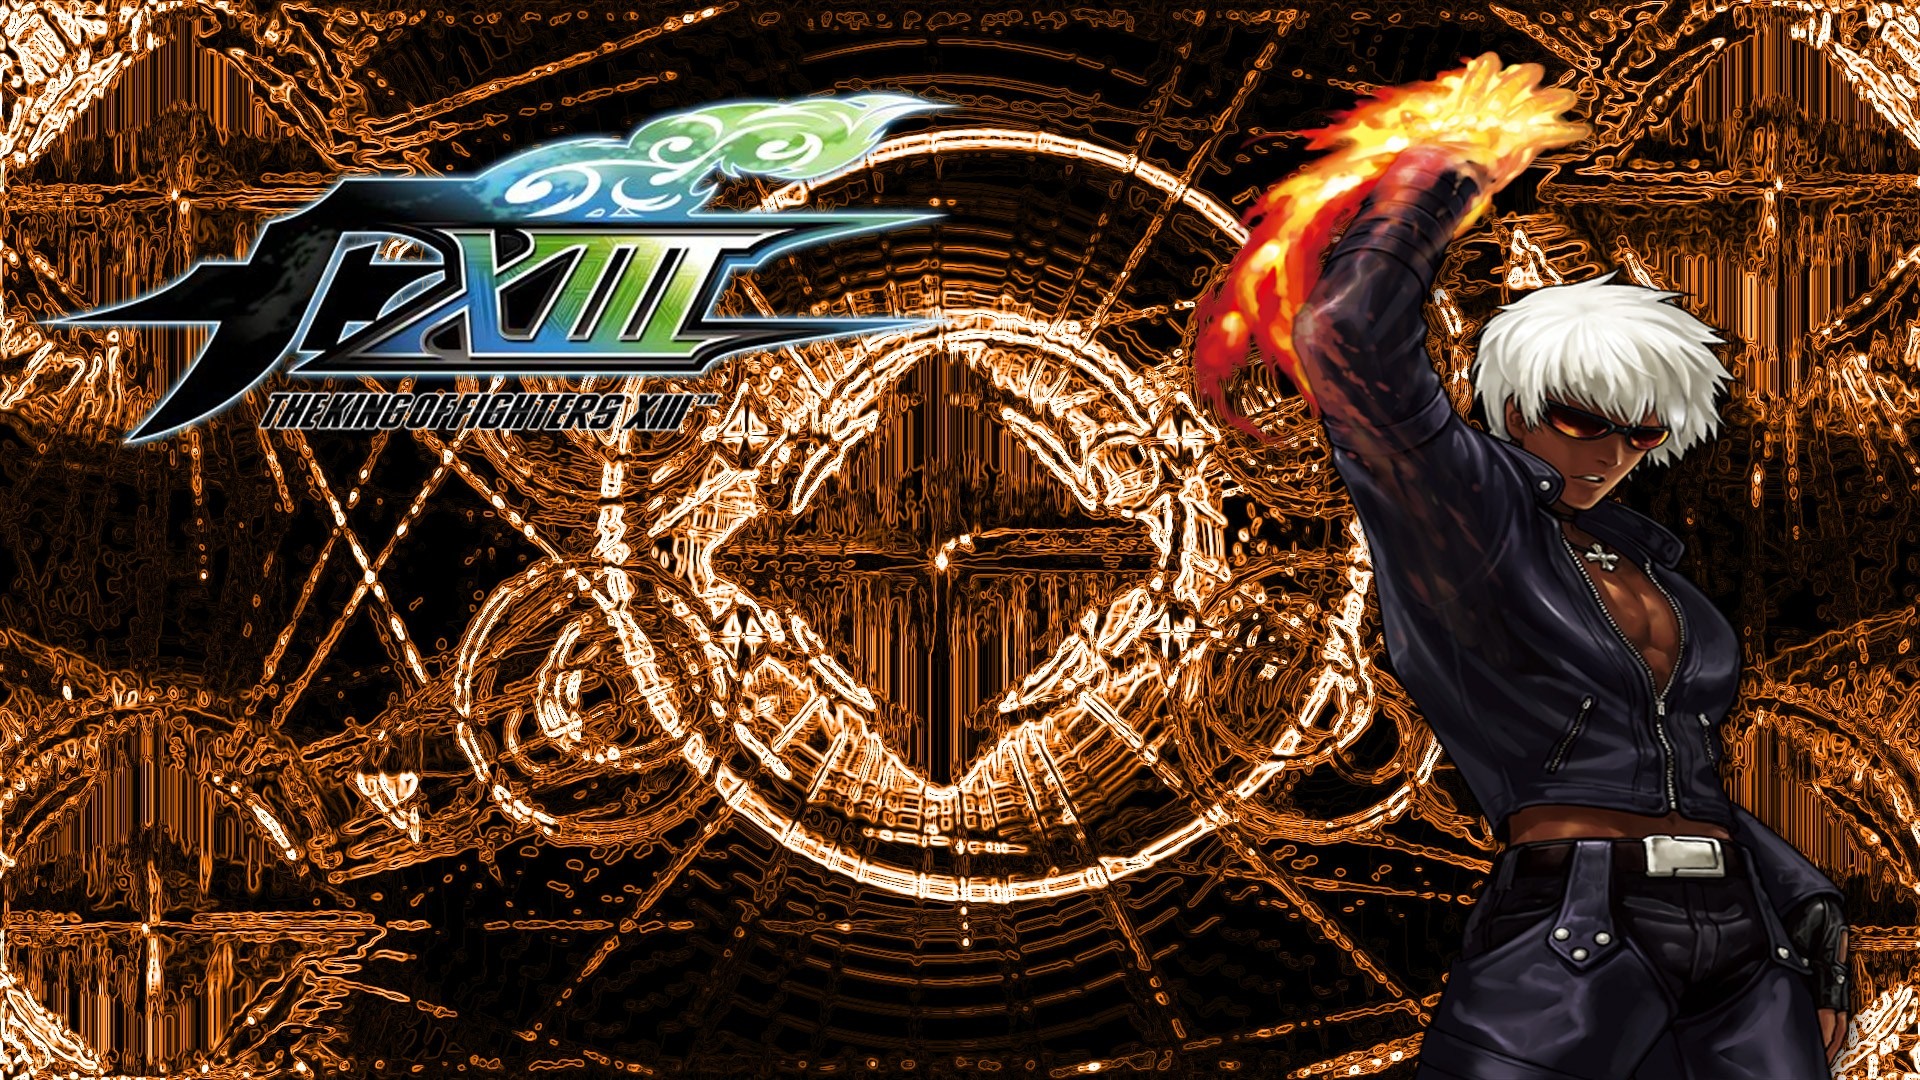 The King of Fighters XIII 拳皇13 壁纸专辑8 - 1920x1080